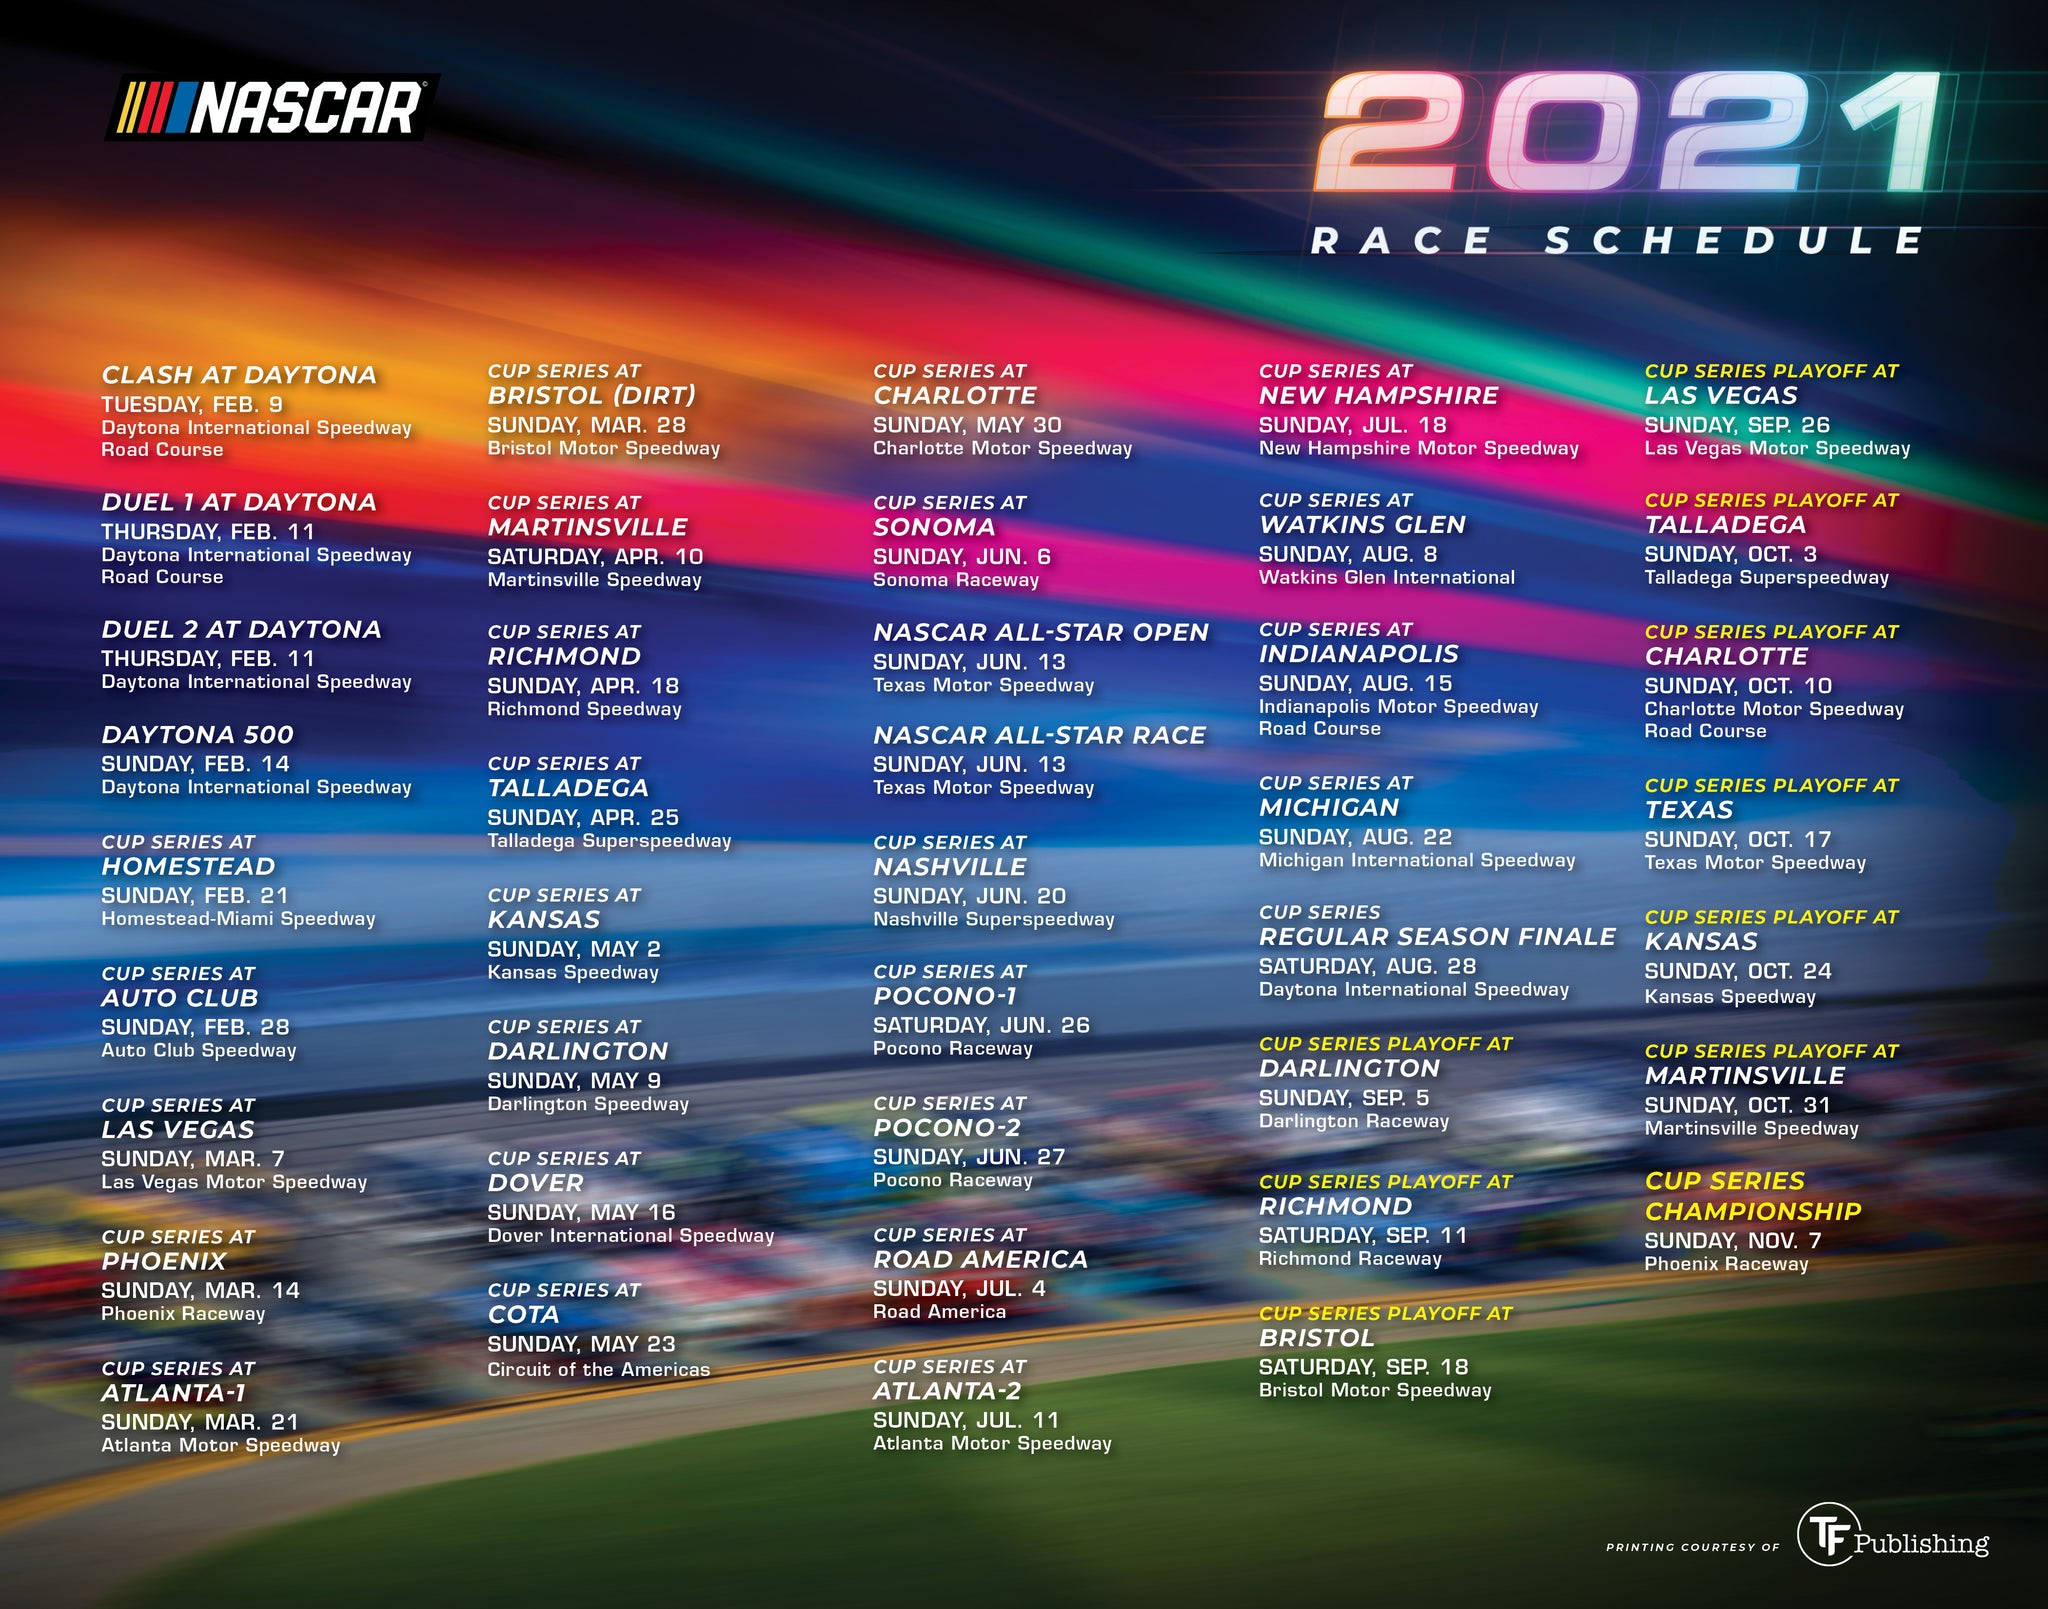 Nascar Schedule 2021 - What I Would Like The 2021 Nascar Schedule To Be Youtube / Comprehensive